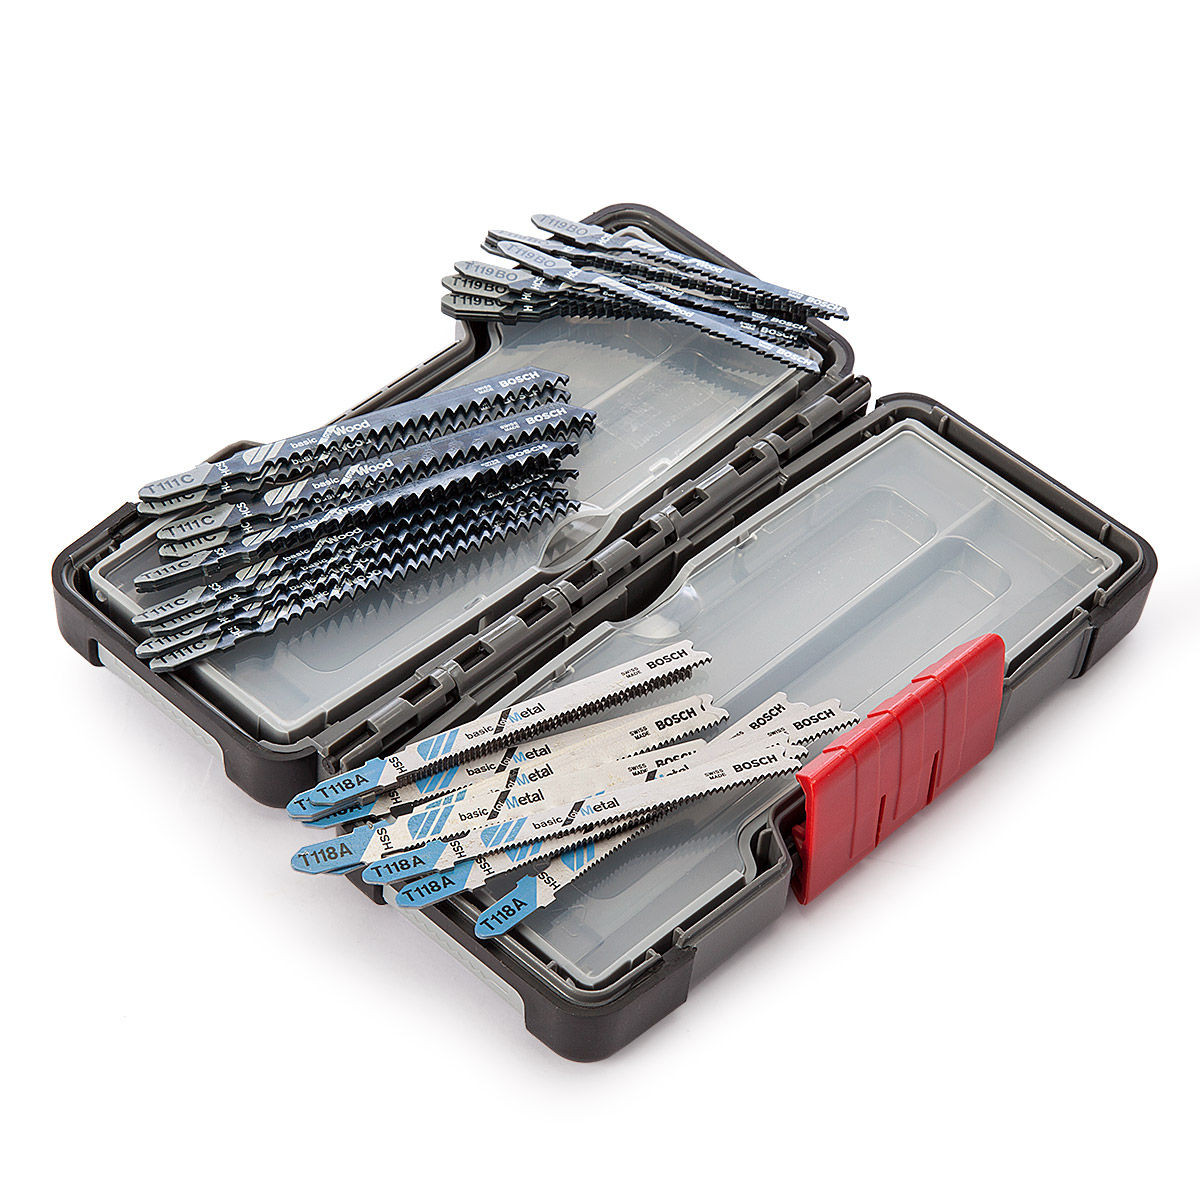 Bosch Basic Jigsaw Blades x 30 for Wood and Metal in Tough Box from Toolstop